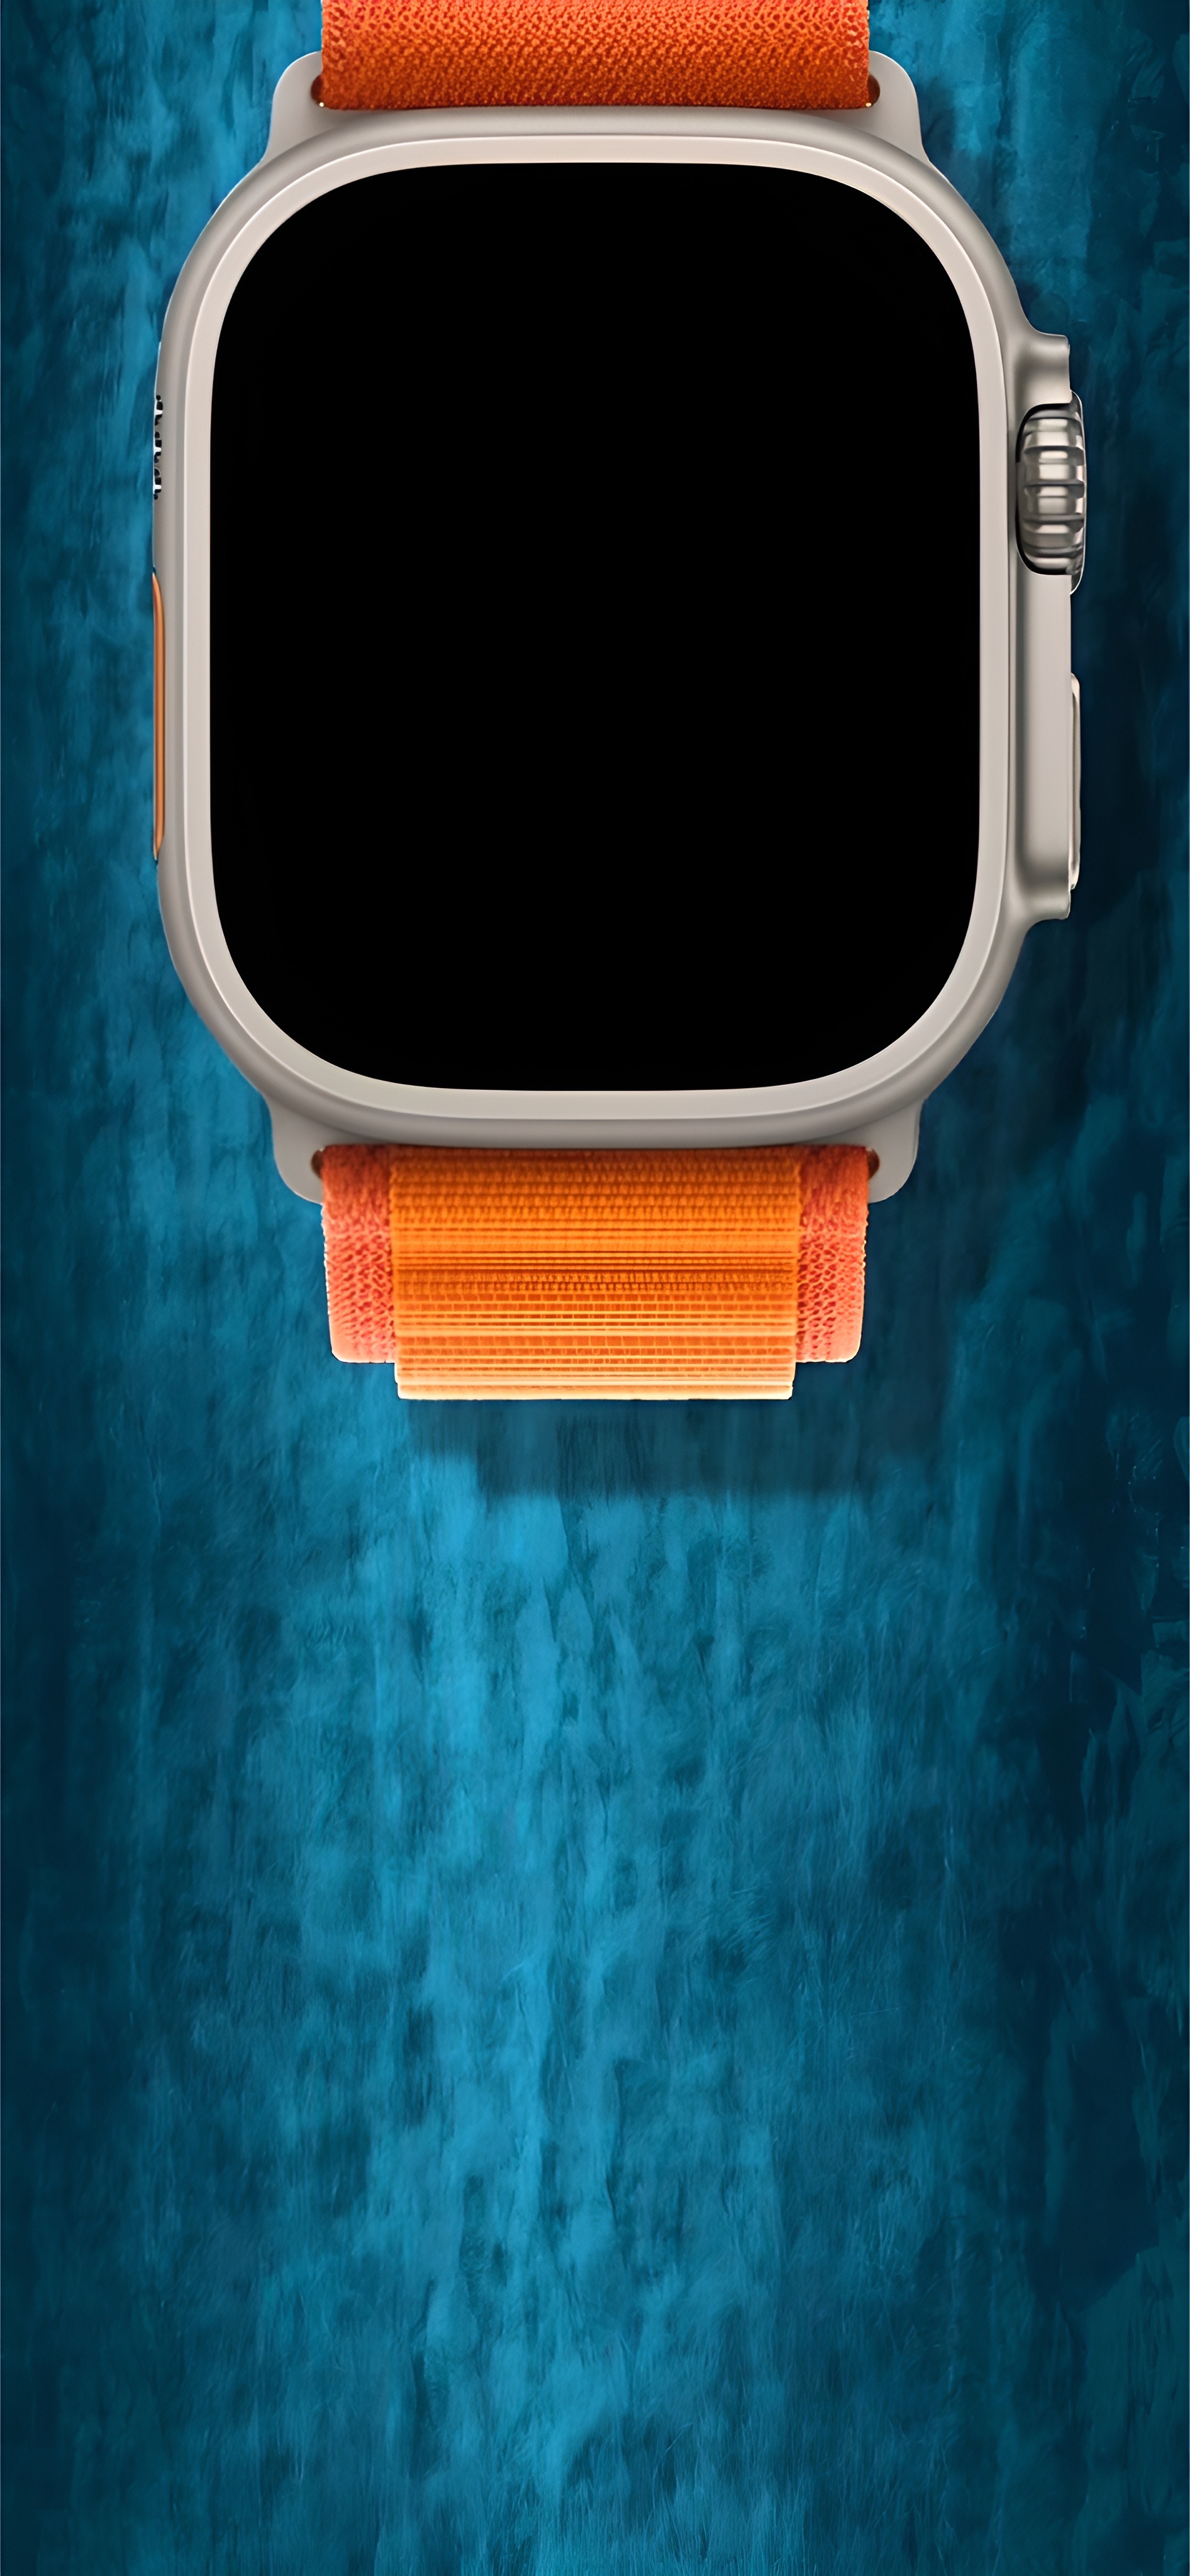 Apple Watch ULTRA wallpaper for iPhone - Wallpapers Central